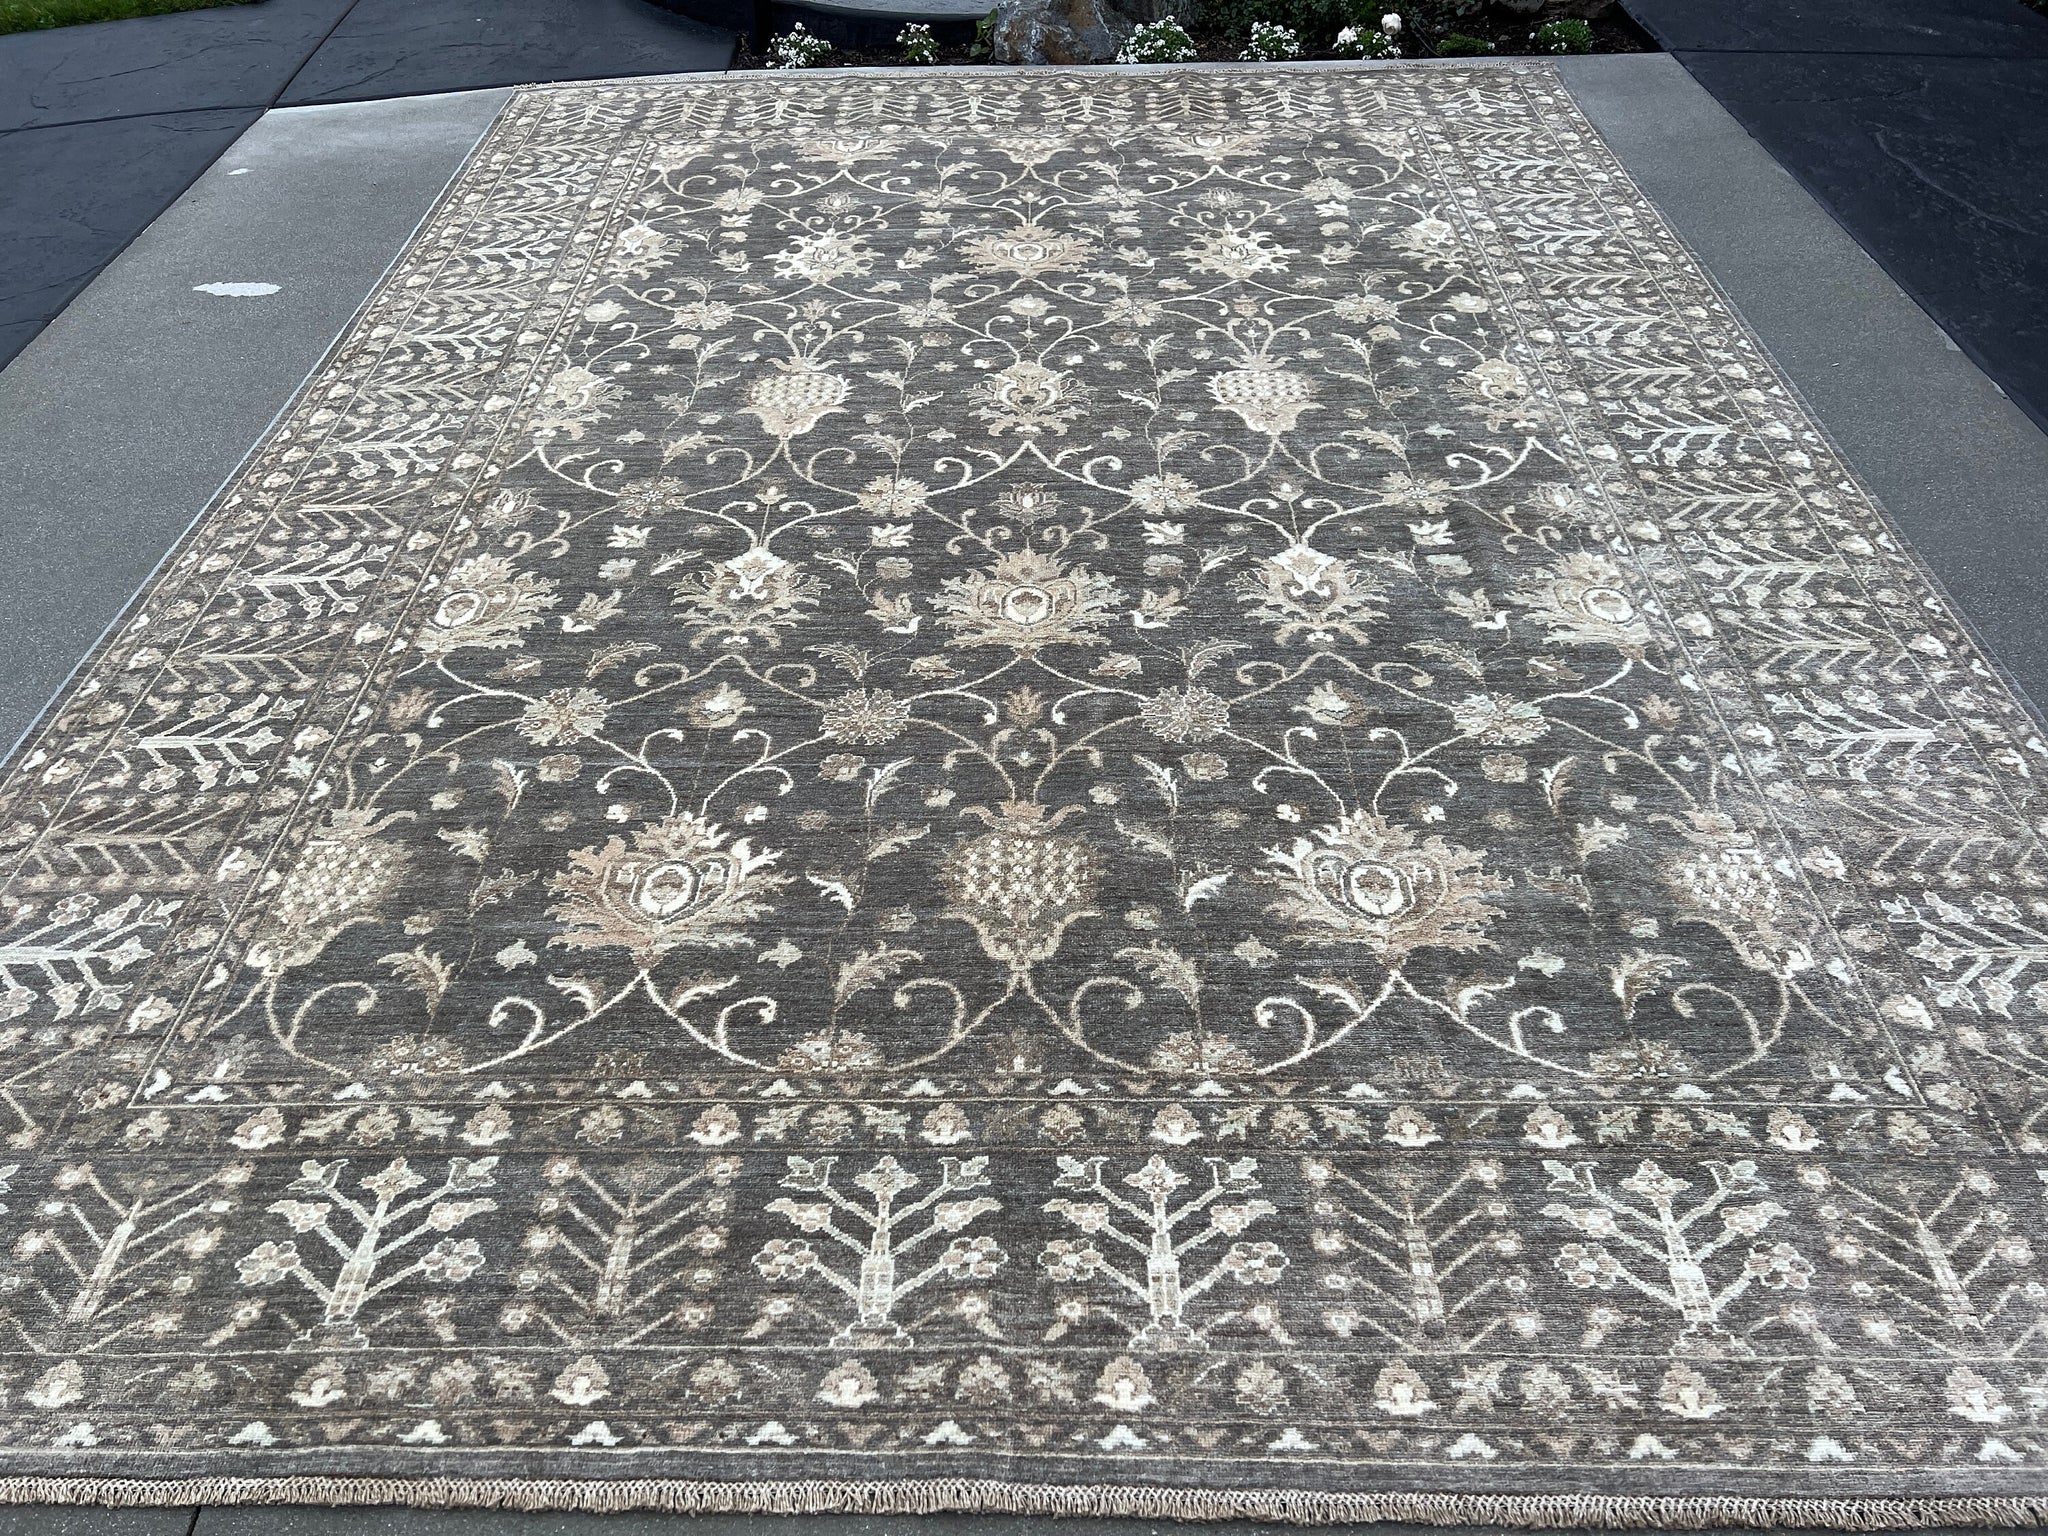 9x12 Handmade Afghan Rug | Grey Gray Ivory White Light Brown | Turkish Oushak Vintage Persian Tribal Floral Hand Knotted Modern Boho Classic